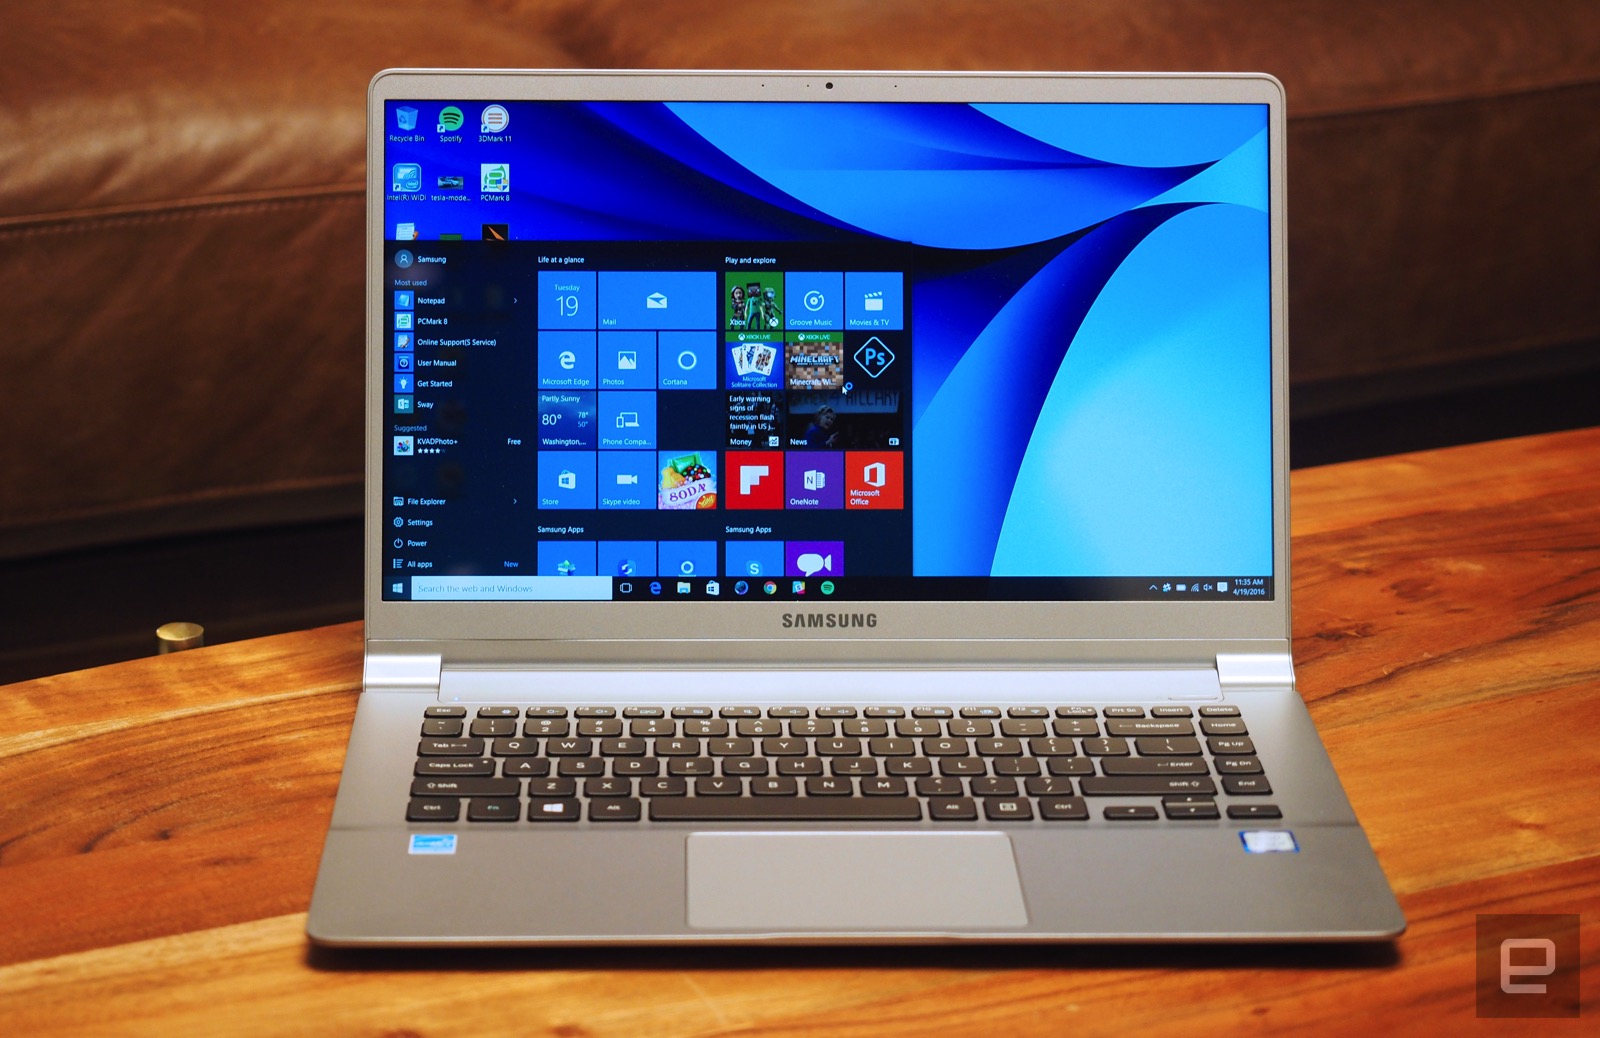 Samsung's thin and light Notebook 9 harks back to simpler times